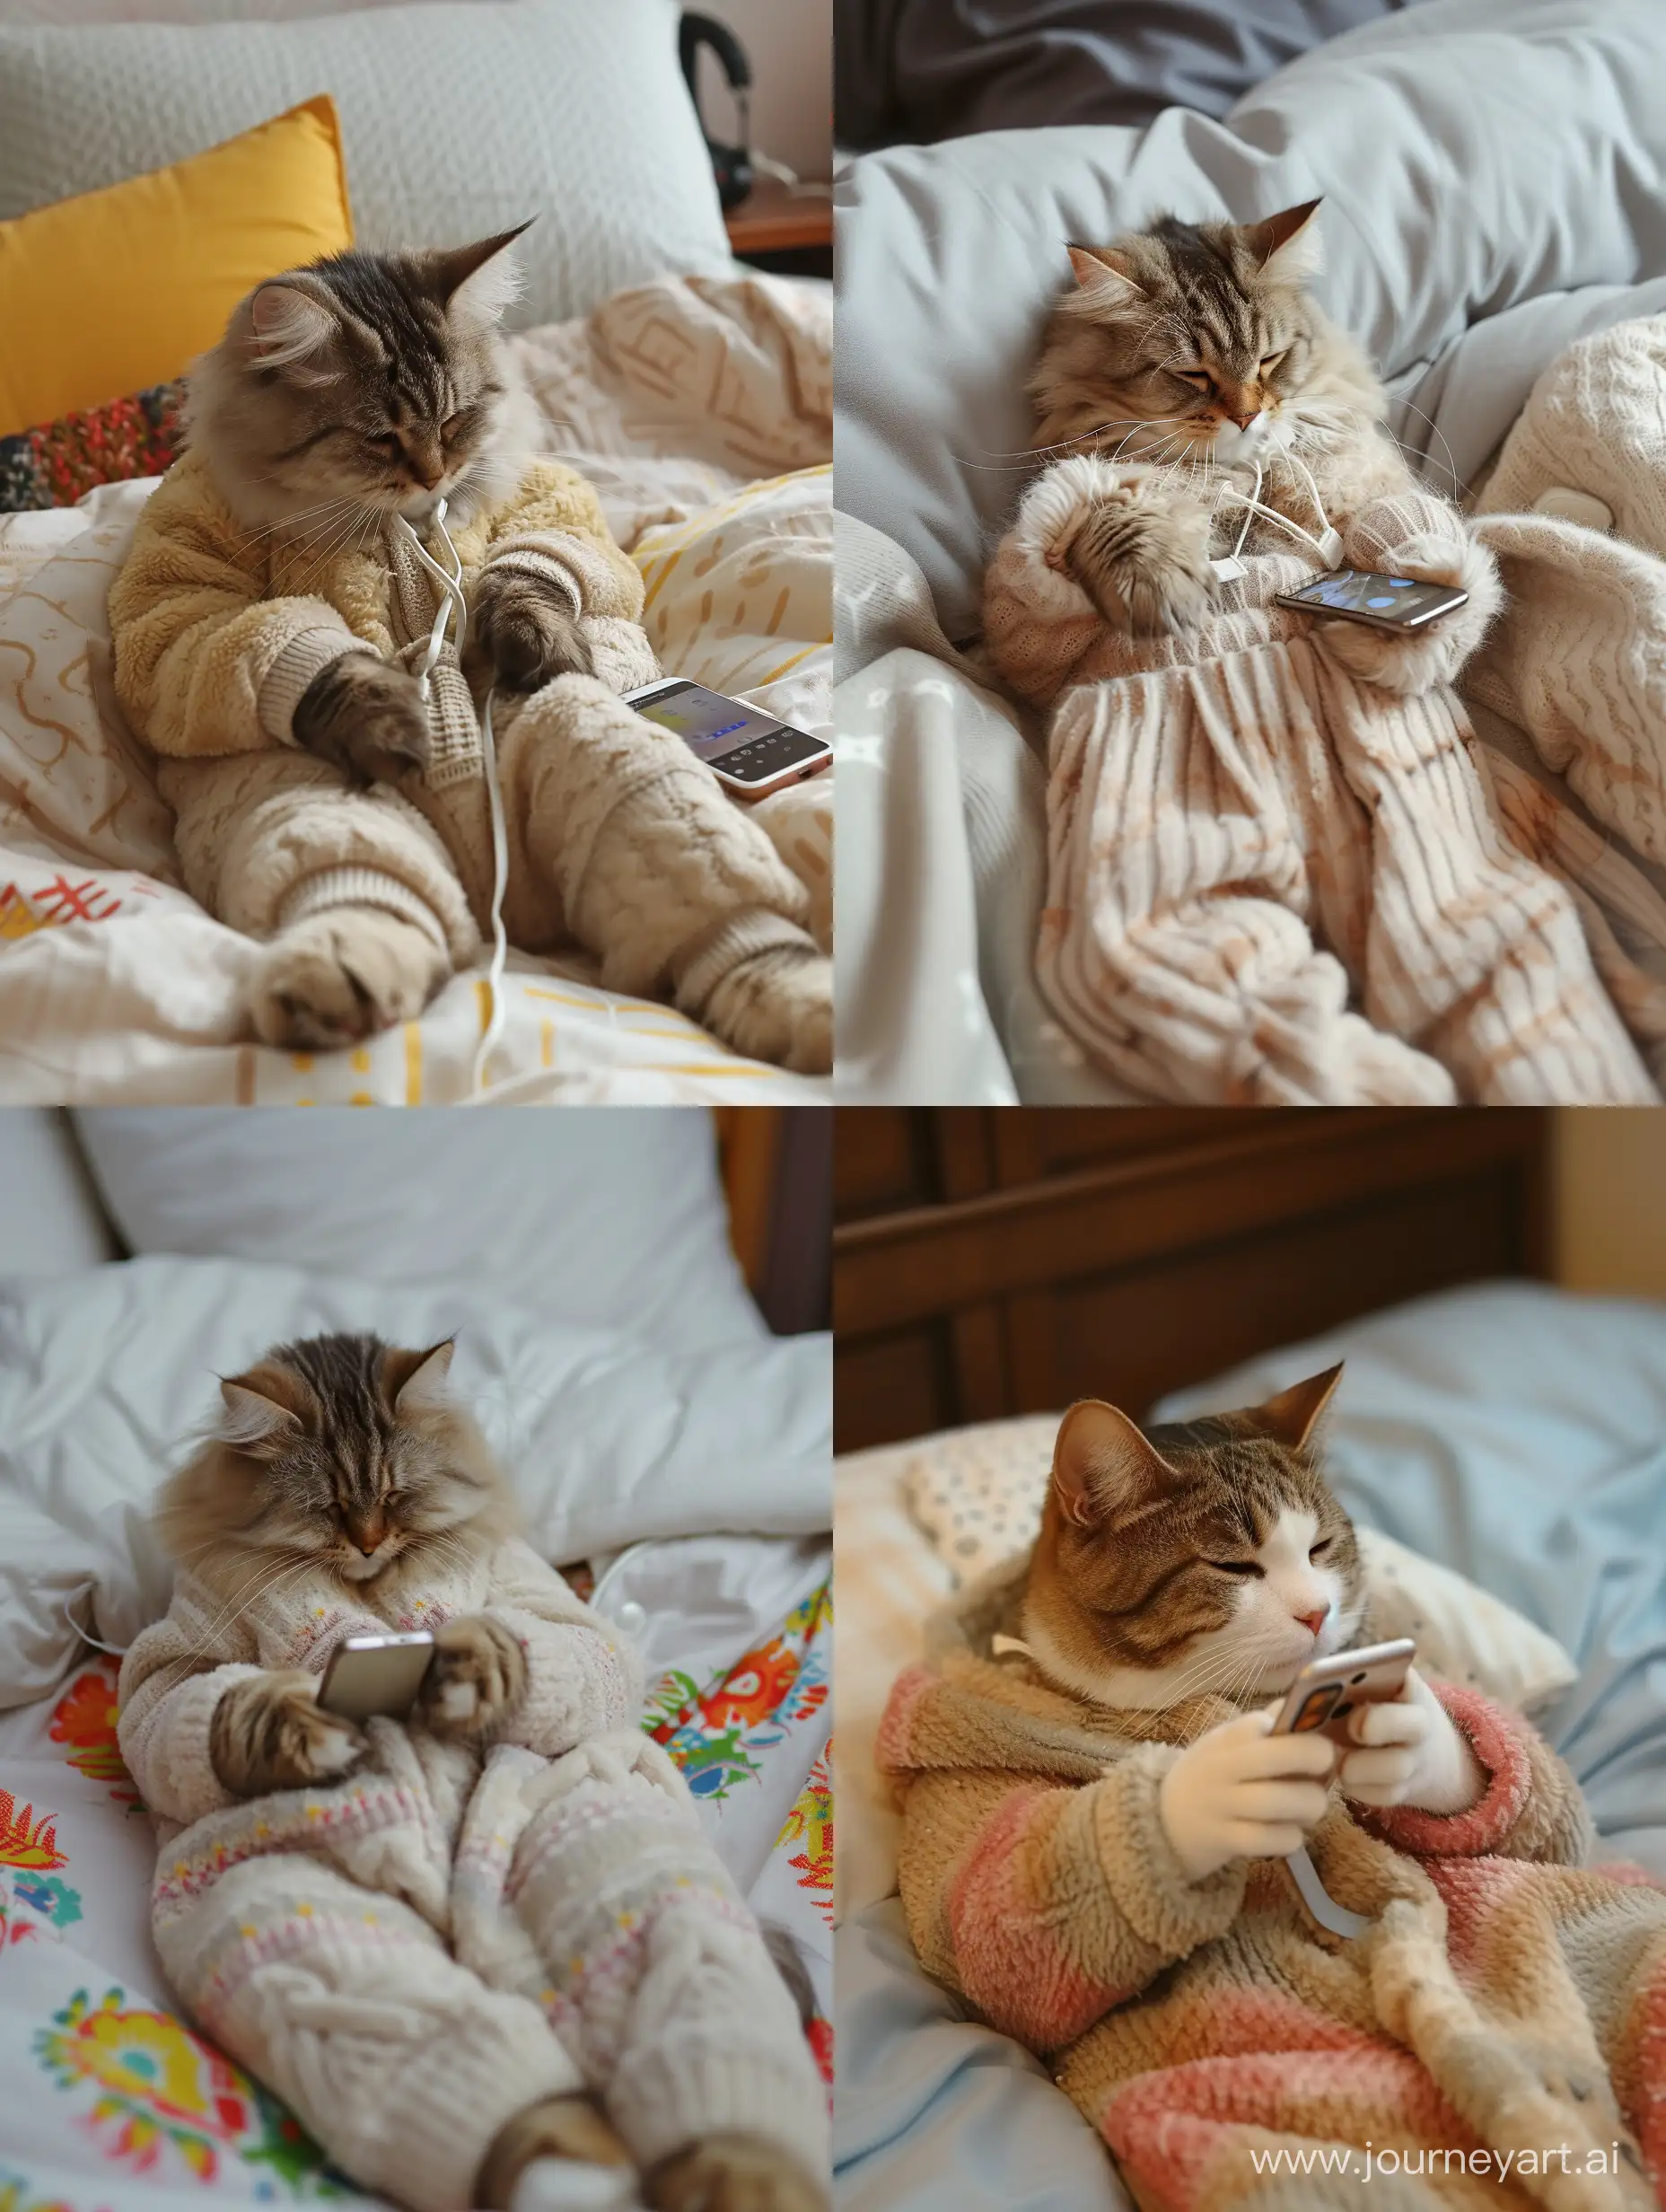 Cozy-Cat-in-Home-Attire-Engaged-with-Mobile-Phone